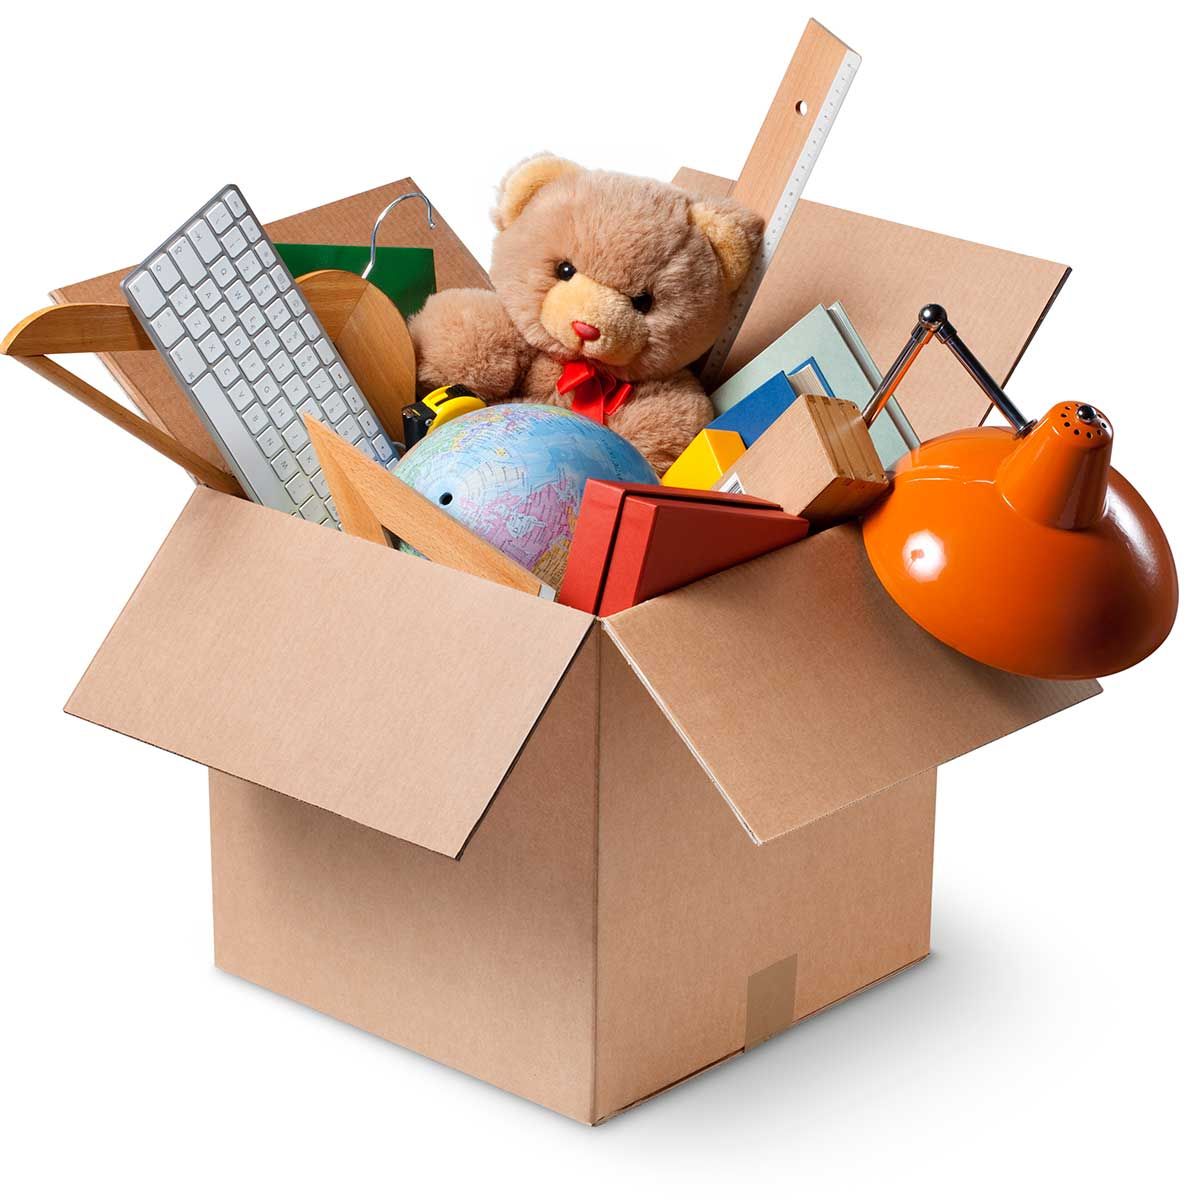 Toy, Stuffed toy, Plush, Teddy bear, Paper product, Baby toys, Cardboard, Box, Carton, Packing materials, 